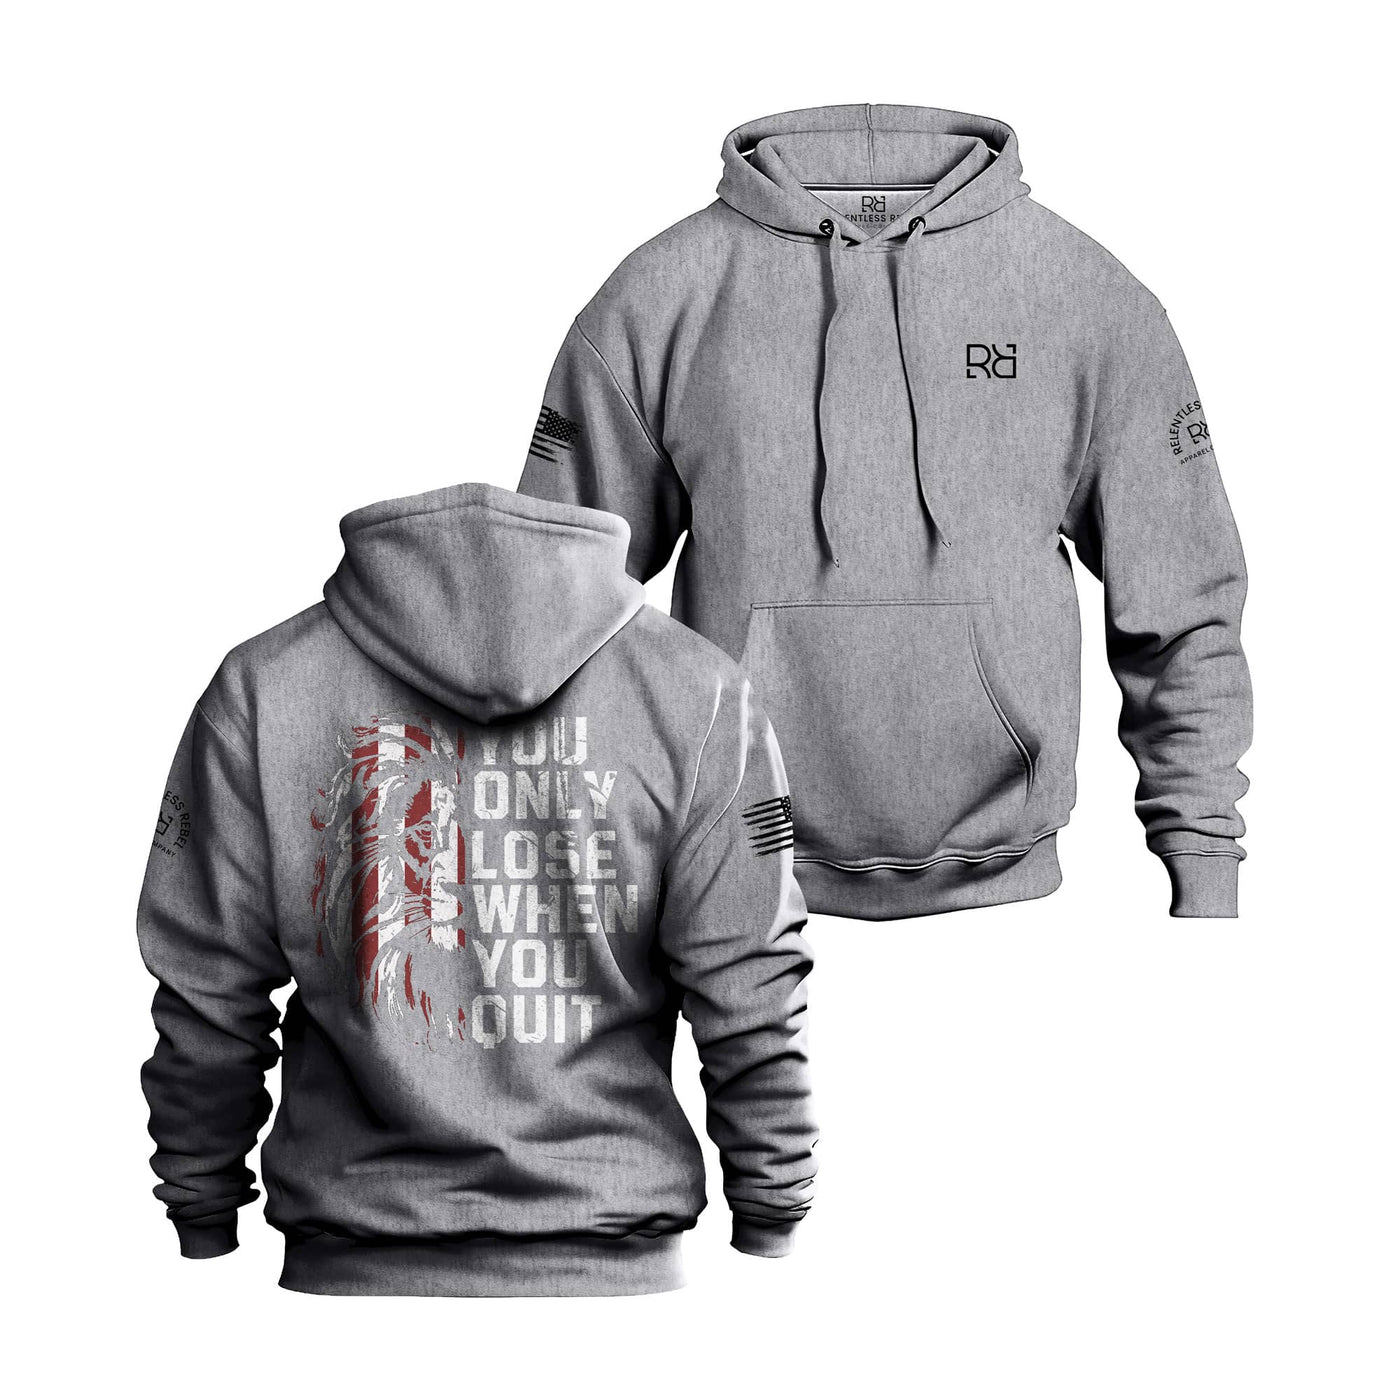 Gunmetal Heather Men's You Only Lose When You Quit Back Design Hoodie